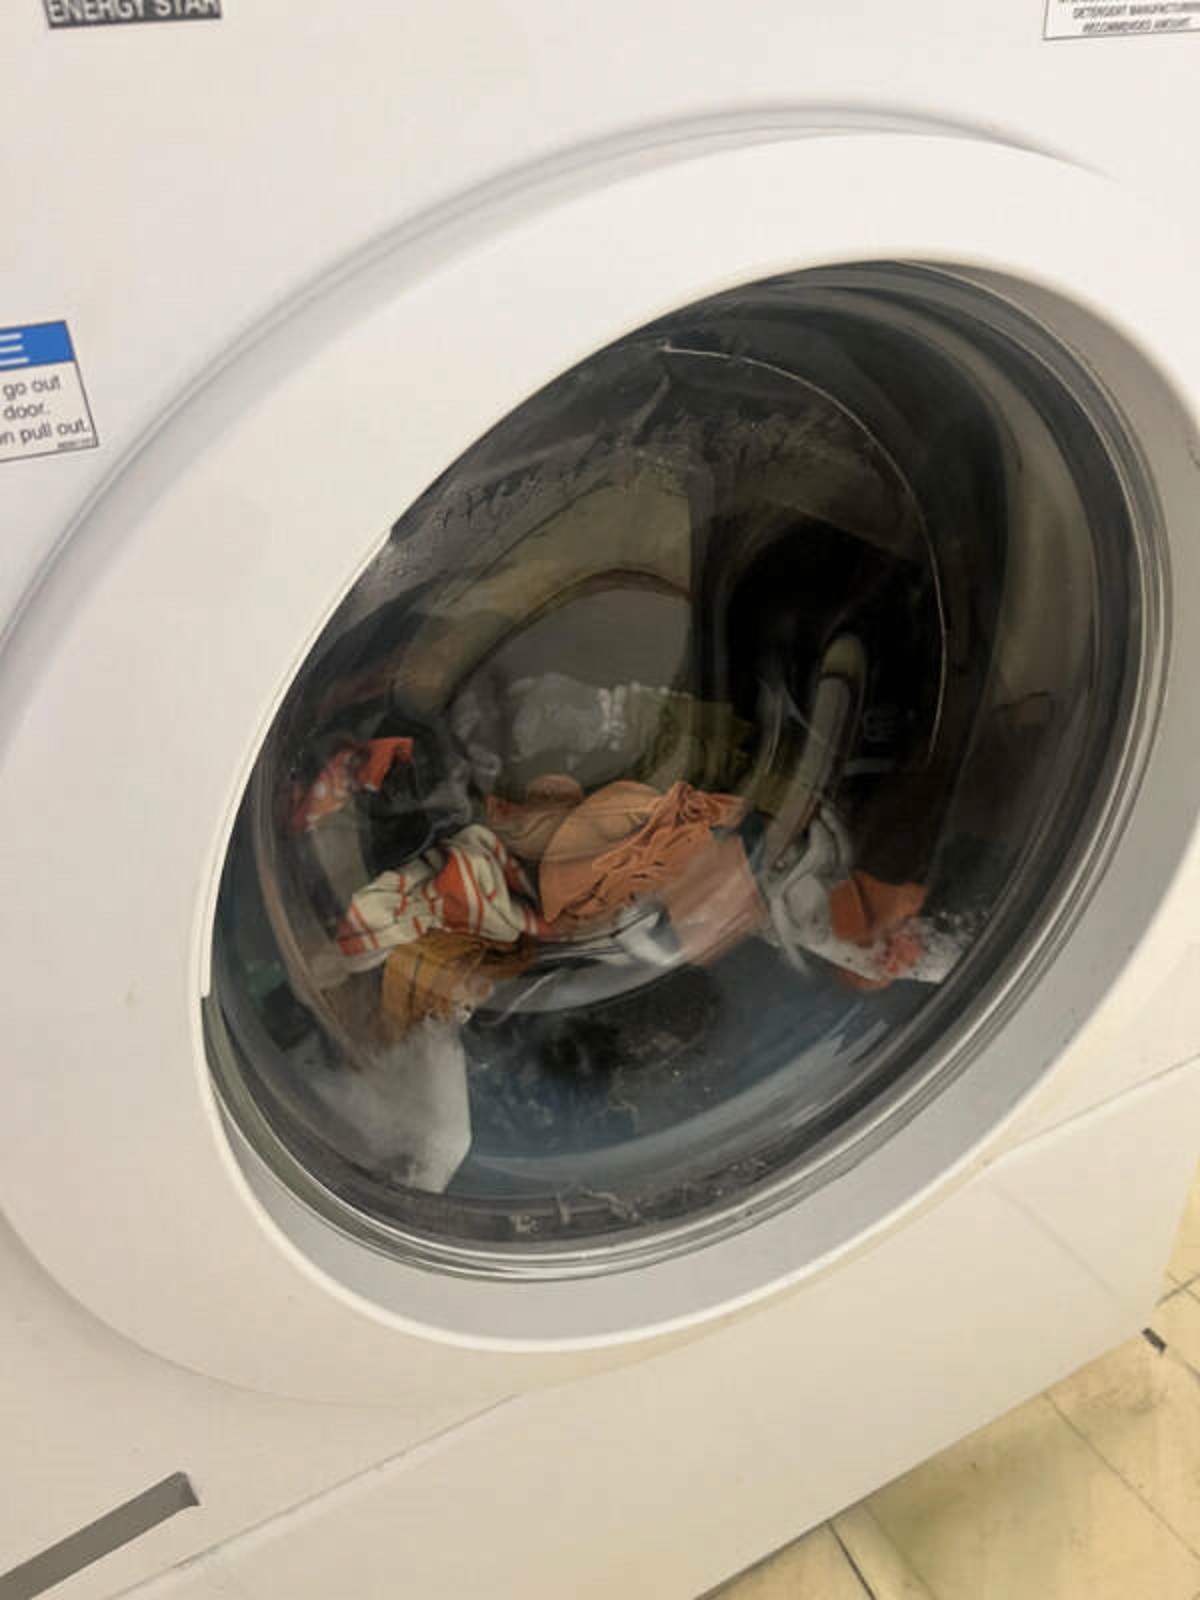 “My apartment’s washer machine stopped mid-cycle and won’t drain. All of my socks/underwear are trapped and I have work tomorrow… Property management currently has no ETA on repairs.”